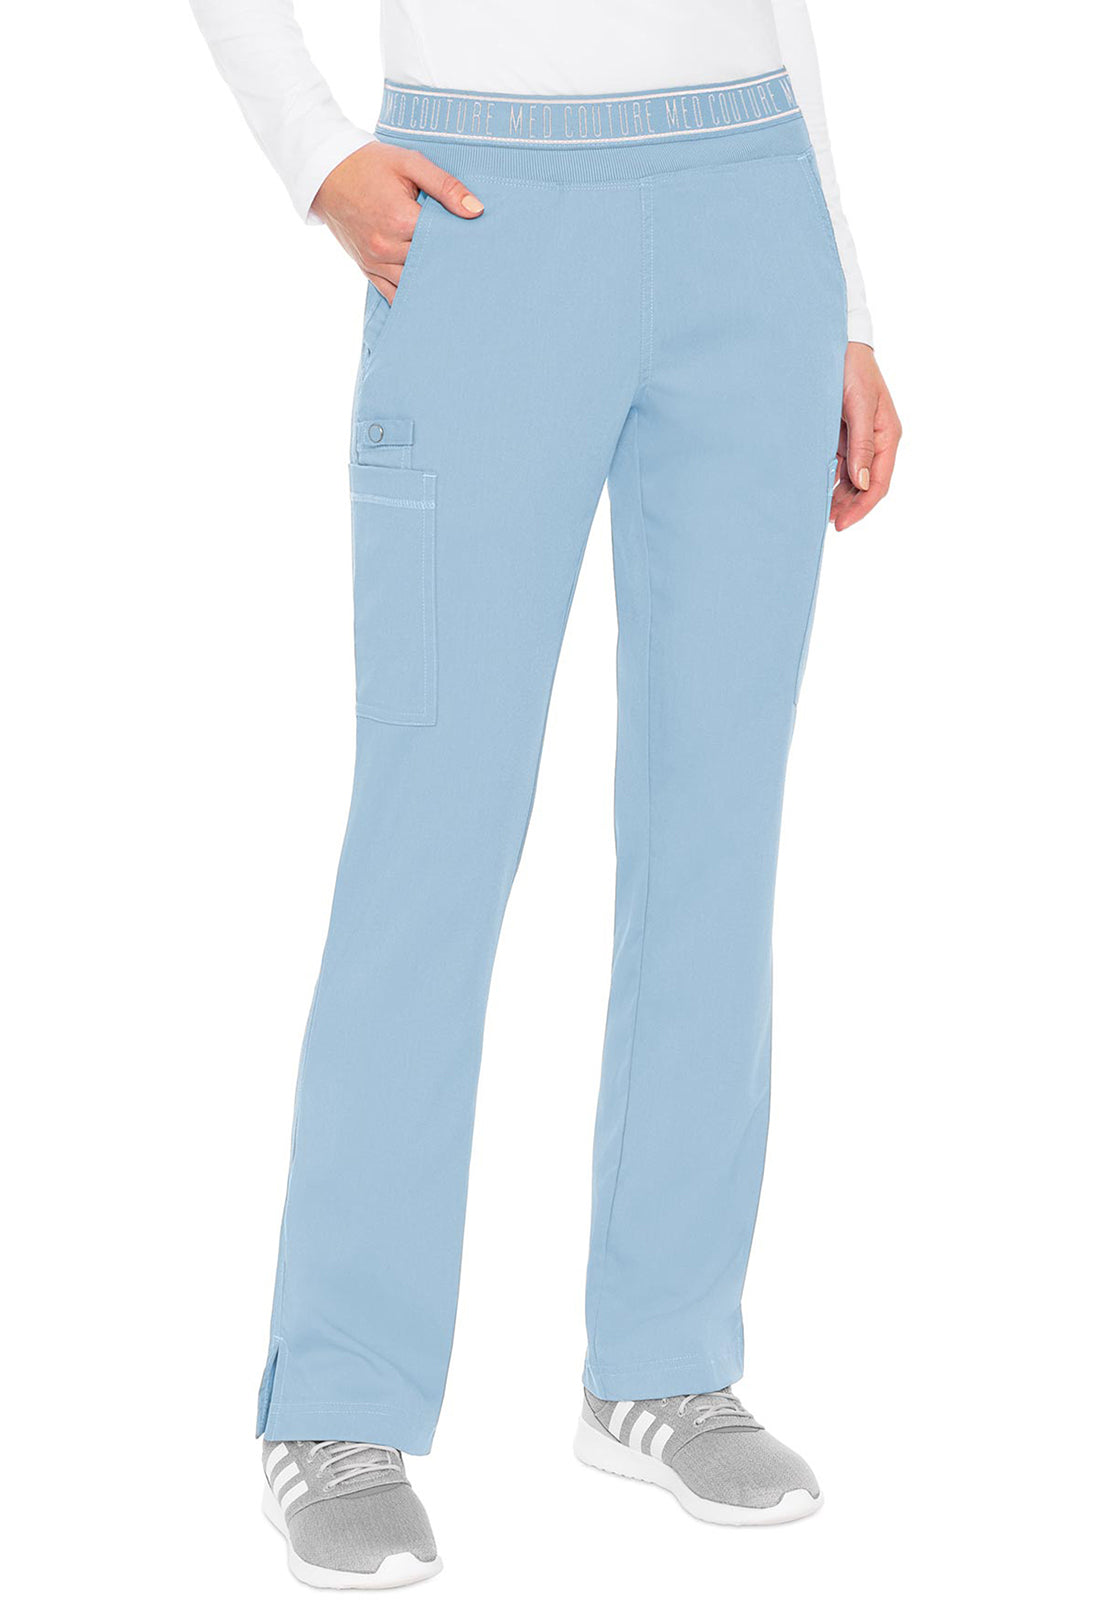 Med Couture Touch Yoga 2 Cargo Pocket Pant (16 Colors 3XL-5XL Regular Length)